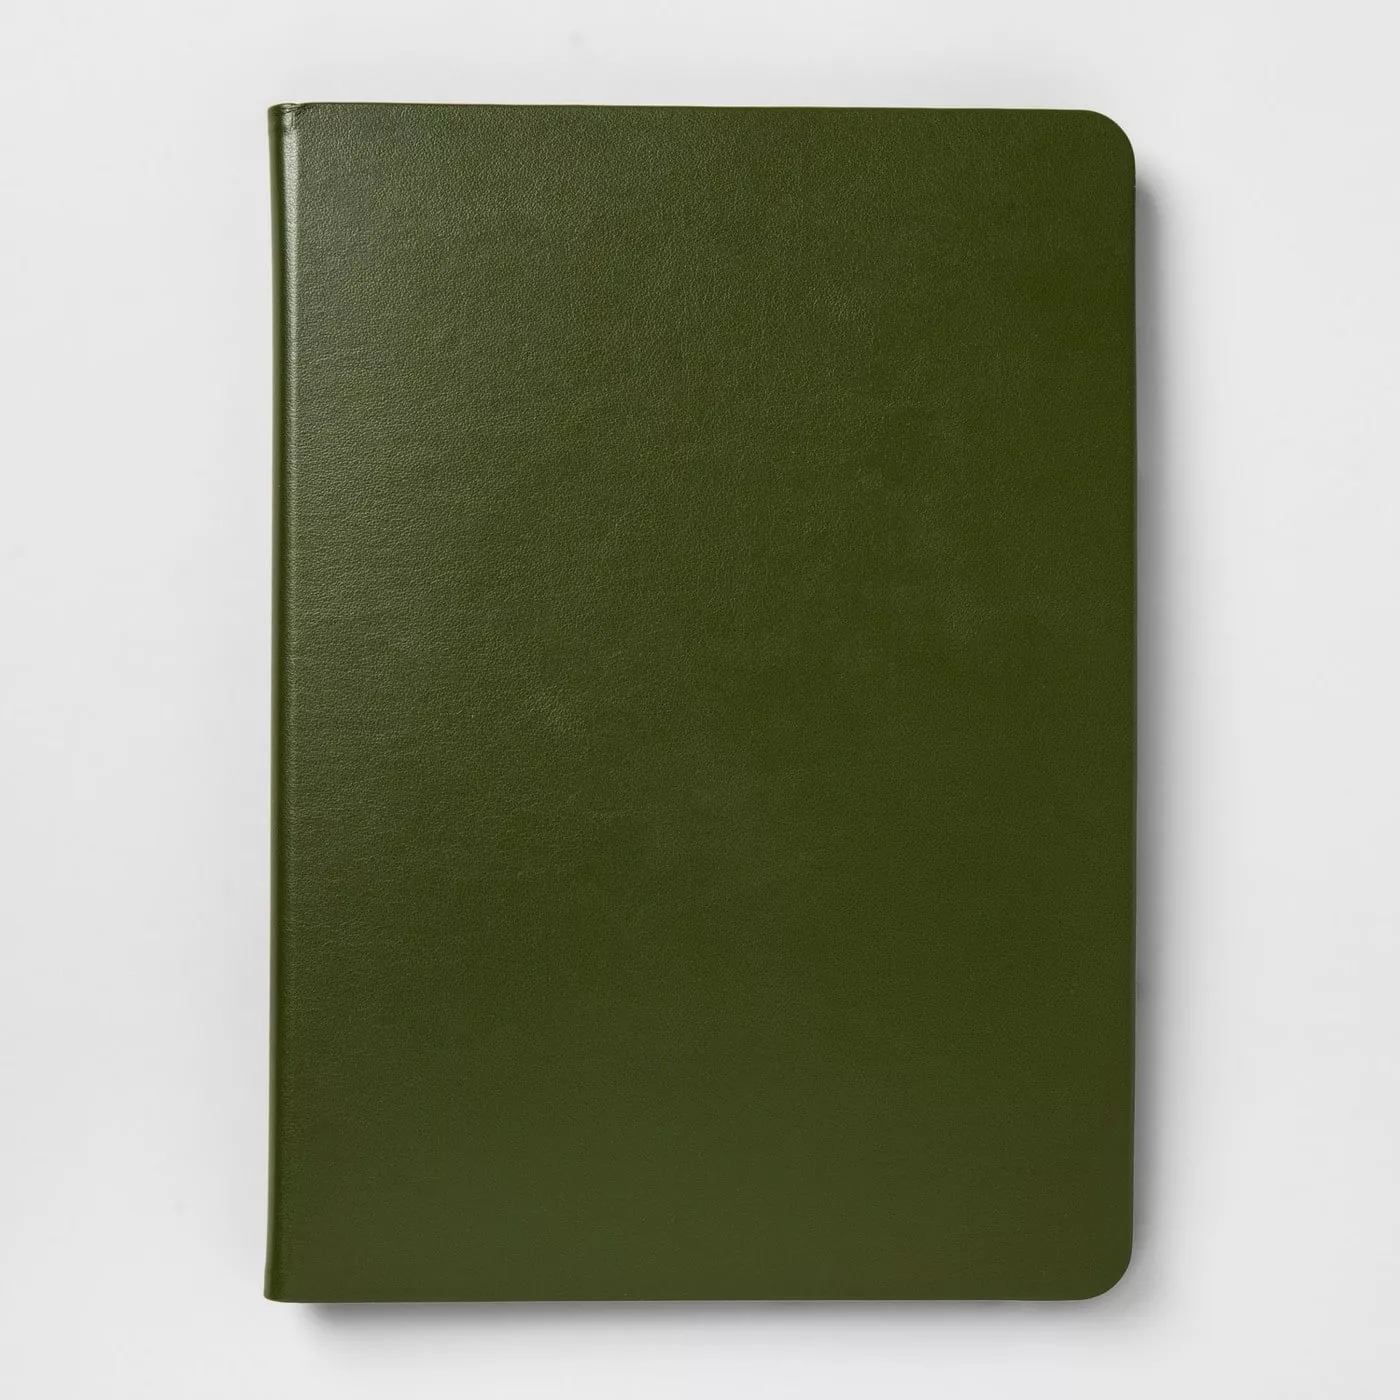 Best Heyday from Target 2018: Camo Green iPad Case